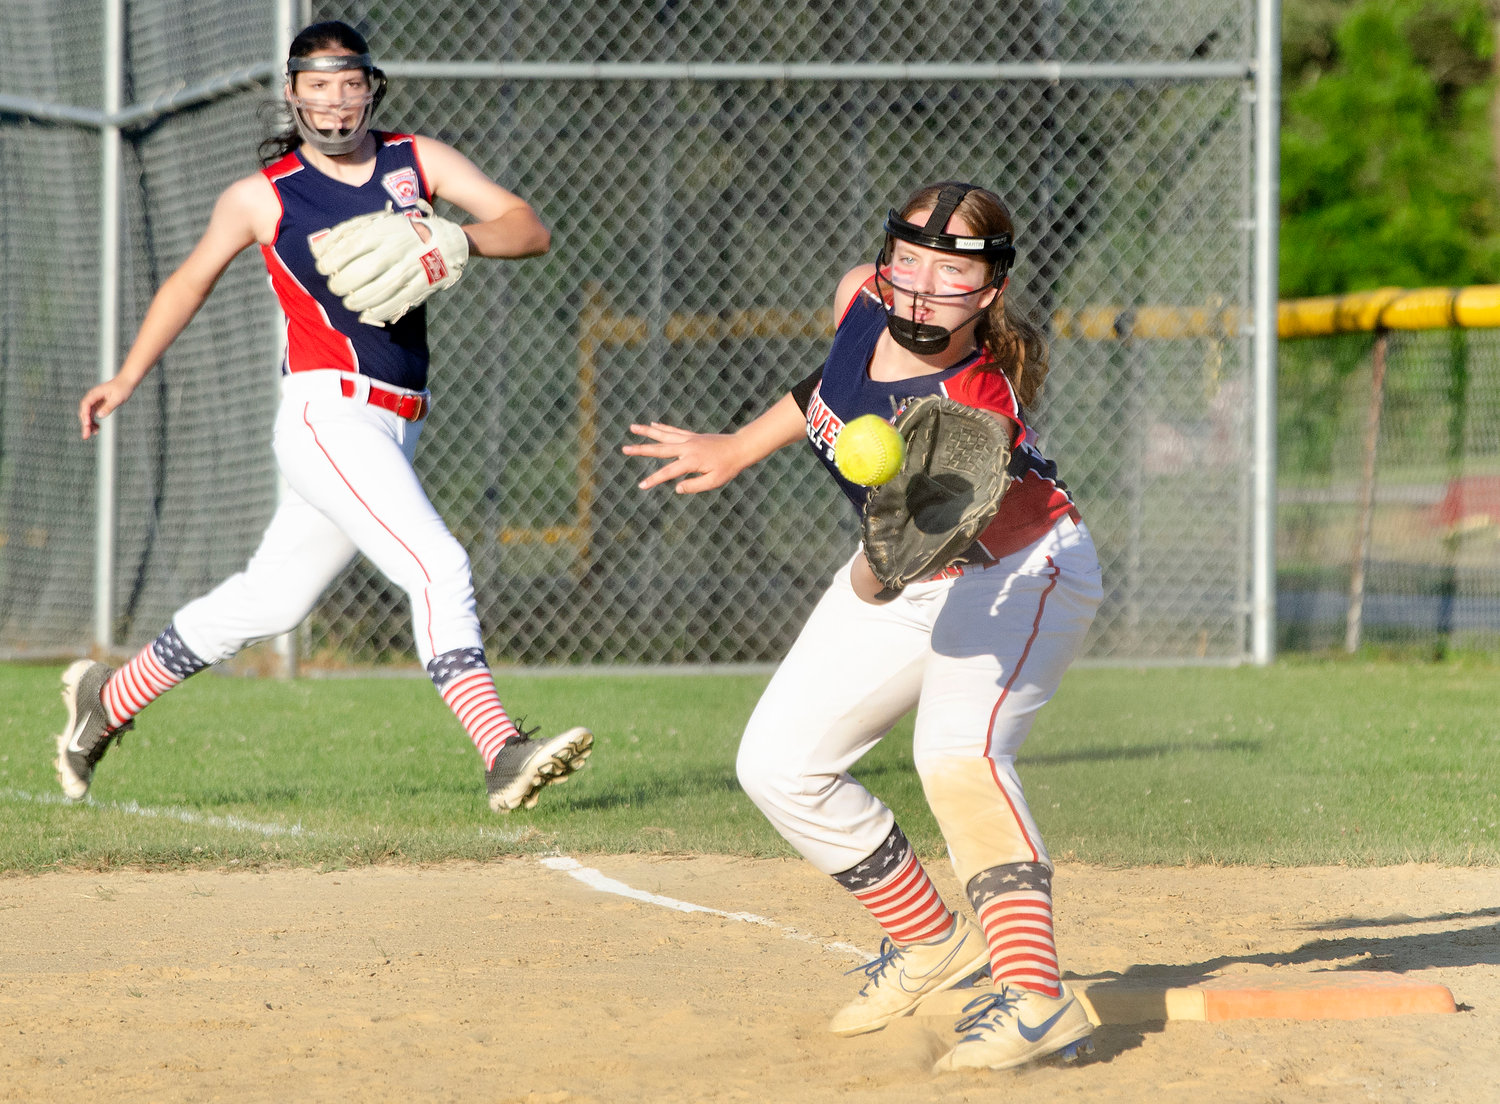 Right fielder Isabella Halstead (left) backs up first baseman Carlie Martin as she takes a throw from third baseman Paisley Parisee to record an out.